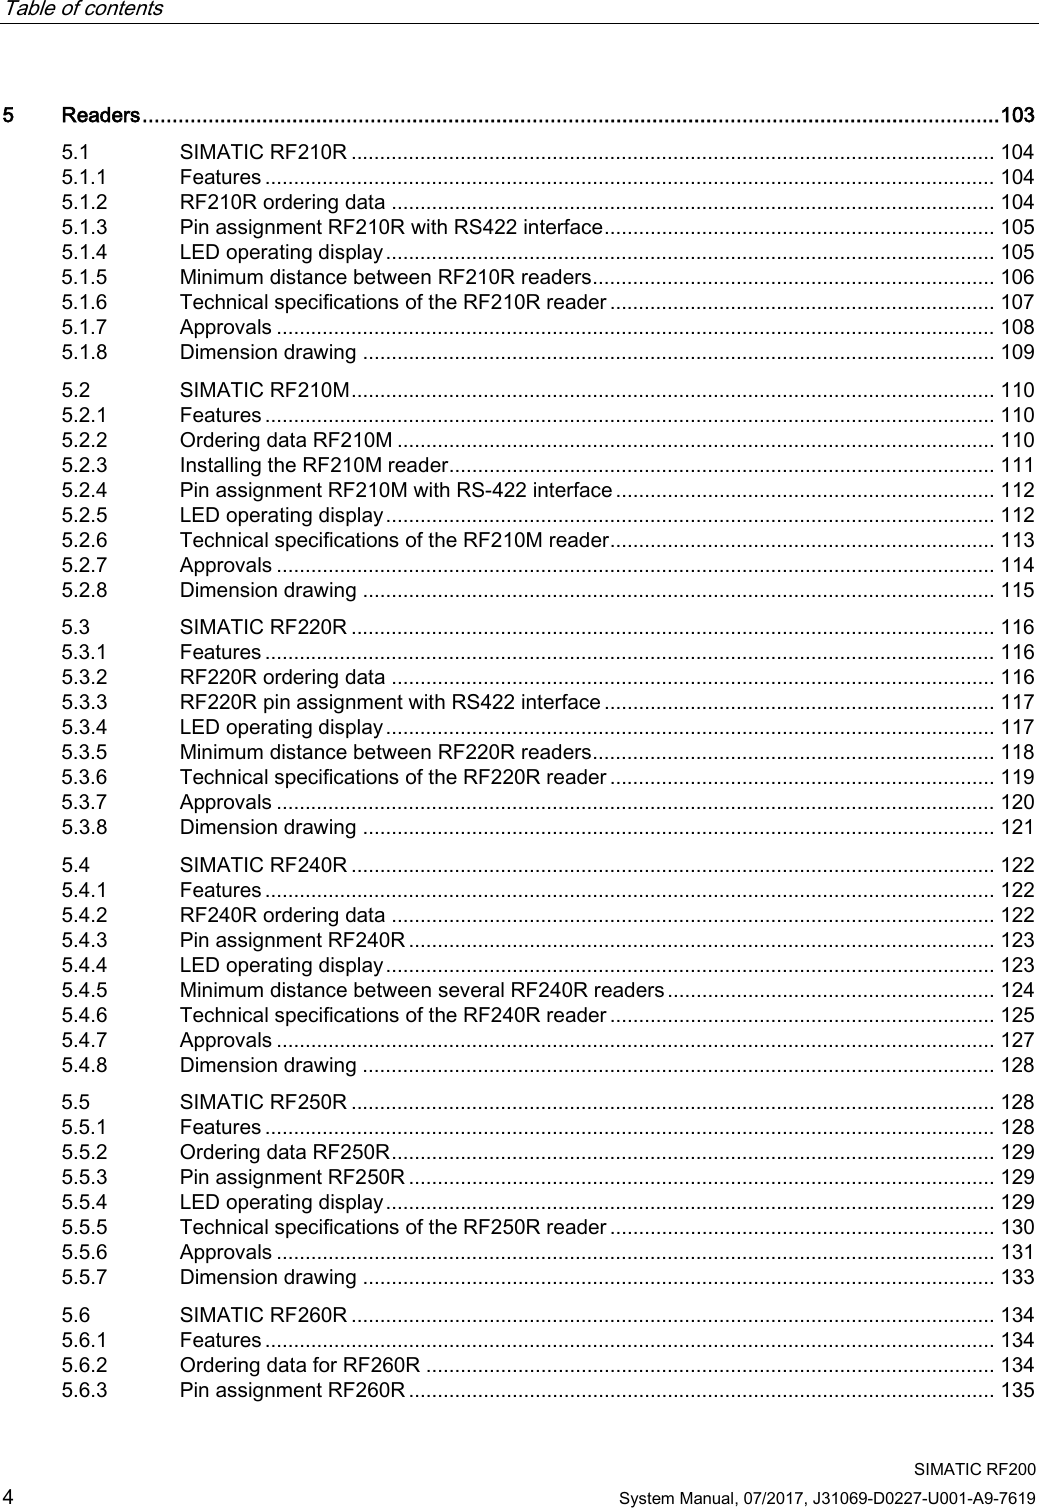 Table of contents     SIMATIC RF200 4 System Manual, 07/2017, J31069-D0227-U001-A9-7619 5  Readers ............................................................................................................................................... 103 5.1 SIMATIC RF210R ................................................................................................................ 104 5.1.1 Features ............................................................................................................................... 104 5.1.2 RF210R ordering data ......................................................................................................... 104 5.1.3 Pin assignment RF210R with RS422 interface .................................................................... 105 5.1.4 LED operating display .......................................................................................................... 105 5.1.5 Minimum distance between RF210R readers ...................................................................... 106 5.1.6 Technical specifications of the RF210R reader ................................................................... 107 5.1.7 Approvals ............................................................................................................................. 108 5.1.8 Dimension drawing .............................................................................................................. 109 5.2 SIMATIC RF210M ................................................................................................................ 110 5.2.1 Features ............................................................................................................................... 110 5.2.2 Ordering data RF210M ........................................................................................................ 110 5.2.3 Installing the RF210M reader ............................................................................................... 111 5.2.4 Pin assignment RF210M with RS-422 interface .................................................................. 112 5.2.5 LED operating display .......................................................................................................... 112 5.2.6 Technical specifications of the RF210M reader ................................................................... 113 5.2.7 Approvals ............................................................................................................................. 114 5.2.8 Dimension drawing .............................................................................................................. 115 5.3 SIMATIC RF220R ................................................................................................................ 116 5.3.1 Features ............................................................................................................................... 116 5.3.2 RF220R ordering data ......................................................................................................... 116 5.3.3 RF220R pin assignment with RS422 interface .................................................................... 117 5.3.4 LED operating display .......................................................................................................... 117 5.3.5 Minimum distance between RF220R readers ...................................................................... 118 5.3.6 Technical specifications of the RF220R reader ................................................................... 119 5.3.7 Approvals ............................................................................................................................. 120 5.3.8 Dimension drawing .............................................................................................................. 121 5.4 SIMATIC RF240R ................................................................................................................ 122 5.4.1 Features ............................................................................................................................... 122 5.4.2 RF240R ordering data ......................................................................................................... 122 5.4.3 Pin assignment RF240R ...................................................................................................... 123 5.4.4 LED operating display .......................................................................................................... 123 5.4.5 Minimum distance between several RF240R readers ......................................................... 124 5.4.6 Technical specifications of the RF240R reader ................................................................... 125 5.4.7 Approvals ............................................................................................................................. 127 5.4.8 Dimension drawing .............................................................................................................. 128 5.5 SIMATIC RF250R ................................................................................................................ 128 5.5.1 Features ............................................................................................................................... 128 5.5.2 Ordering data RF250R ......................................................................................................... 129 5.5.3 Pin assignment RF250R ...................................................................................................... 129 5.5.4 LED operating display .......................................................................................................... 129 5.5.5 Technical specifications of the RF250R reader ................................................................... 130 5.5.6 Approvals ............................................................................................................................. 131 5.5.7 Dimension drawing .............................................................................................................. 133 5.6 SIMATIC RF260R ................................................................................................................ 134 5.6.1 Features ............................................................................................................................... 134 5.6.2  Ordering data for RF260R ................................................................................................... 134 5.6.3 Pin assignment RF260R ...................................................................................................... 135 